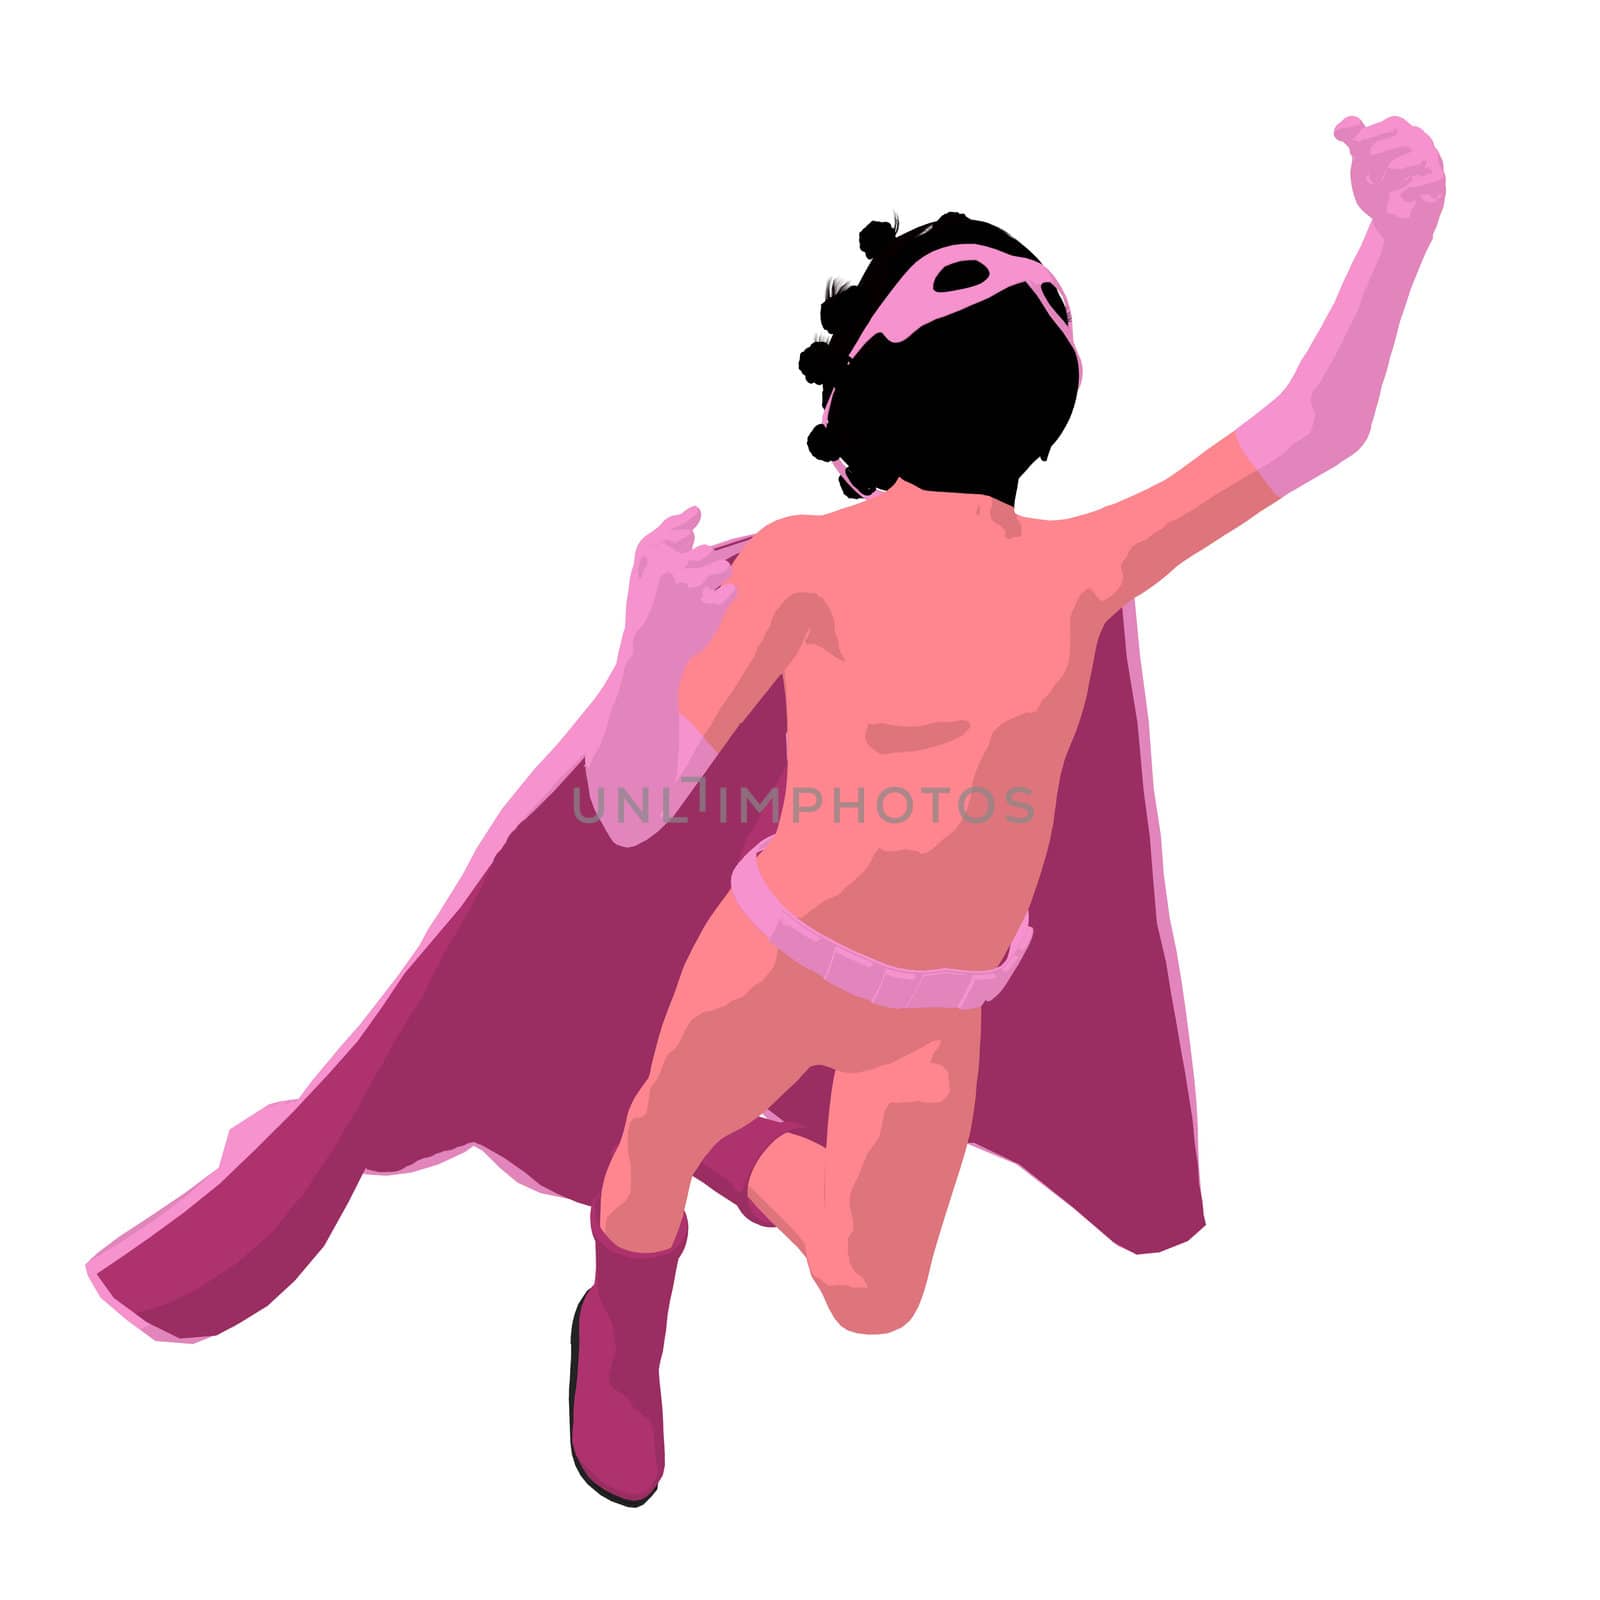 African American Super Hero Girl Illustration Silhouette by kathygold